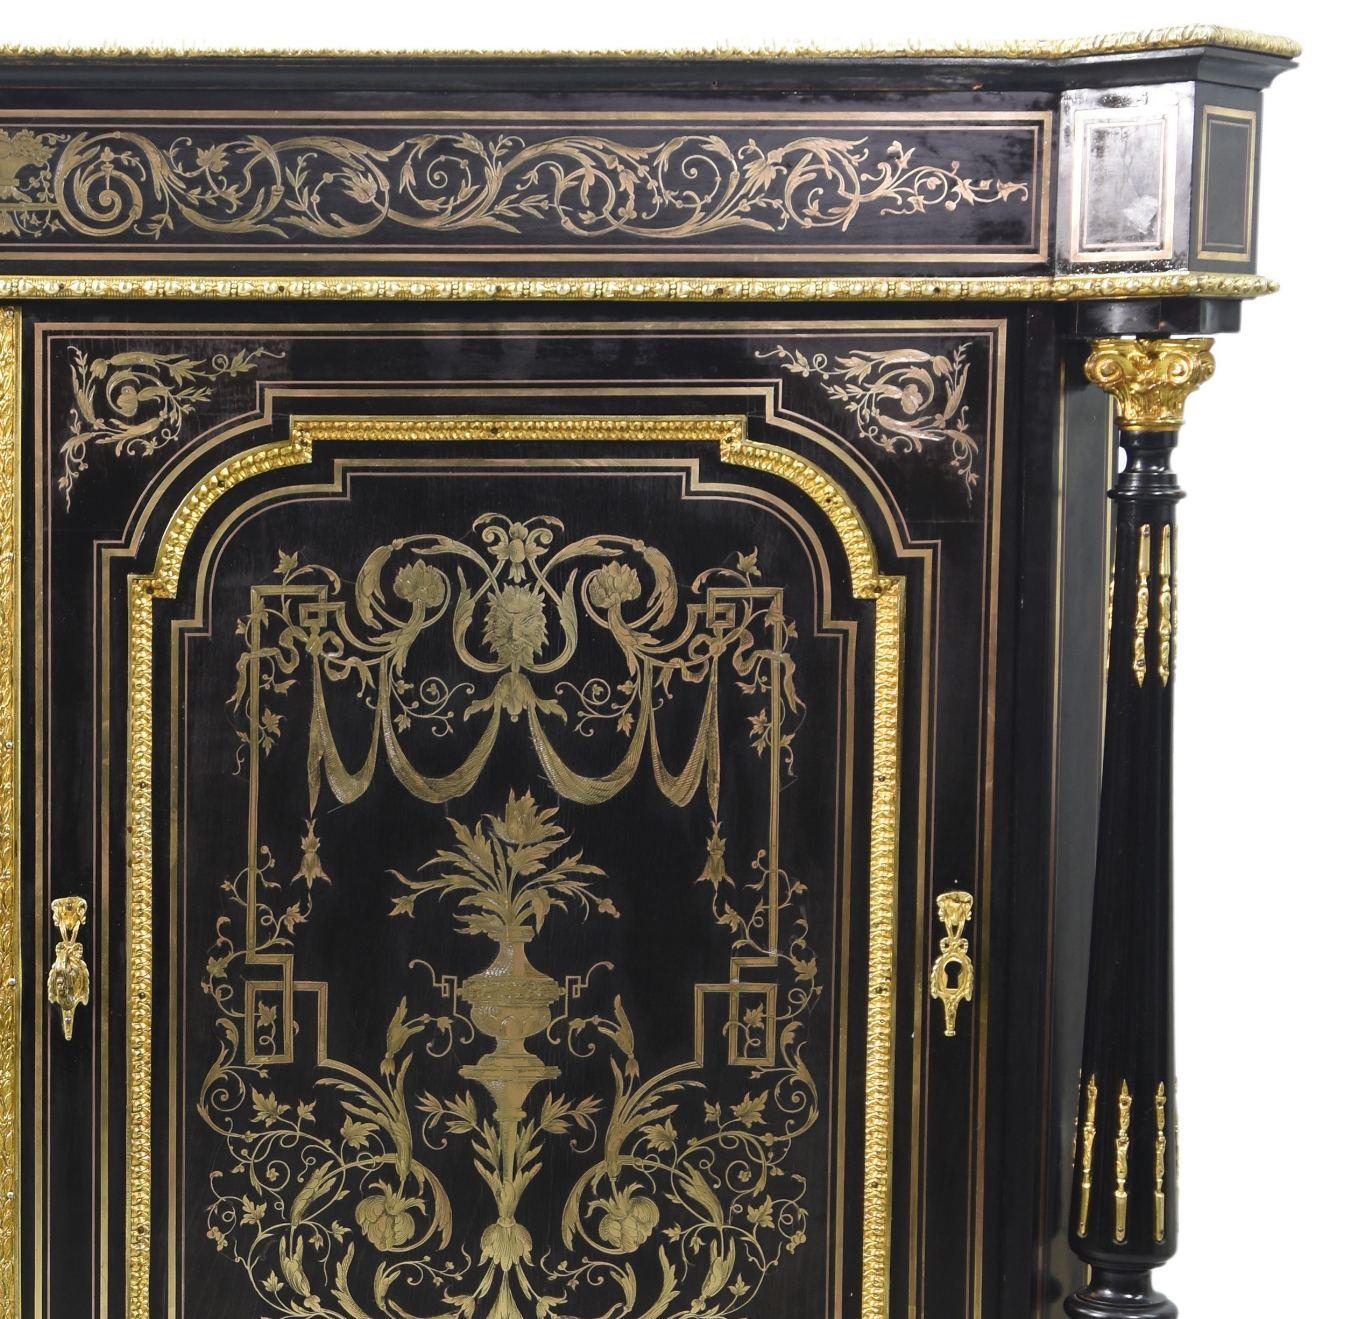 Sideboard with doors richly decorated with Boulle marquetry from the late 19th century on a blackened wooden background decorated with gilded bronze elements. White marble top. Dimensions 111 cm high by 139 cm wide and 49 cm deep. note that some